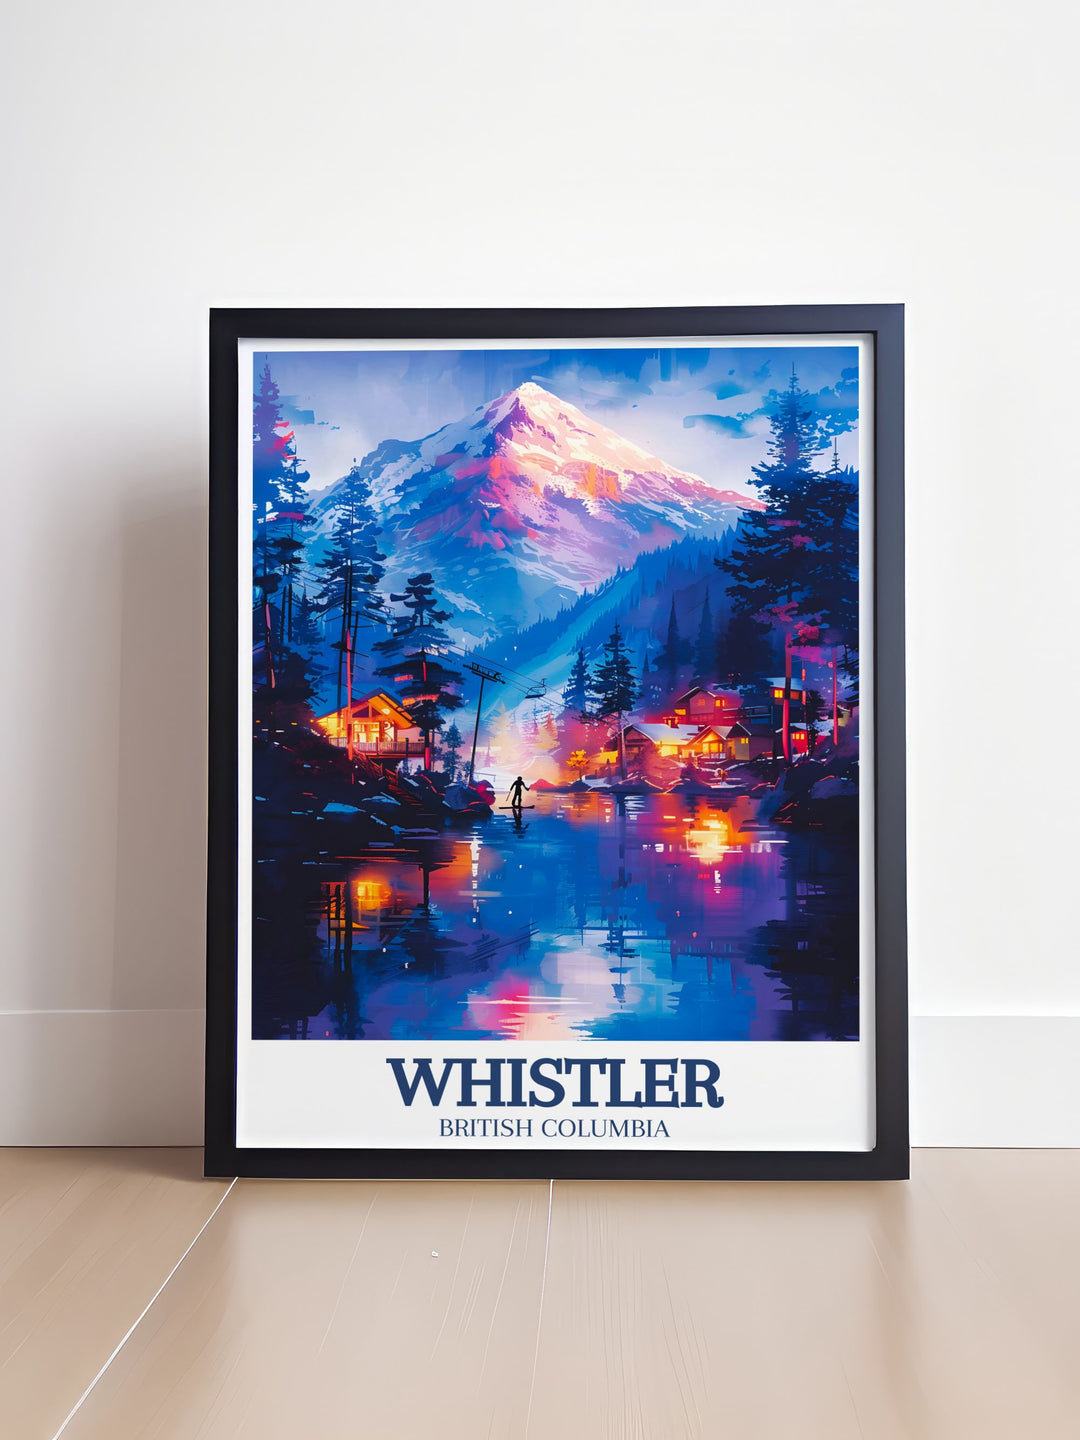 Vintage Coast Mountains print capturing the timeless beauty of the Canadian wilderness adding a touch of natural splendor to any room ideal for art and nature lovers